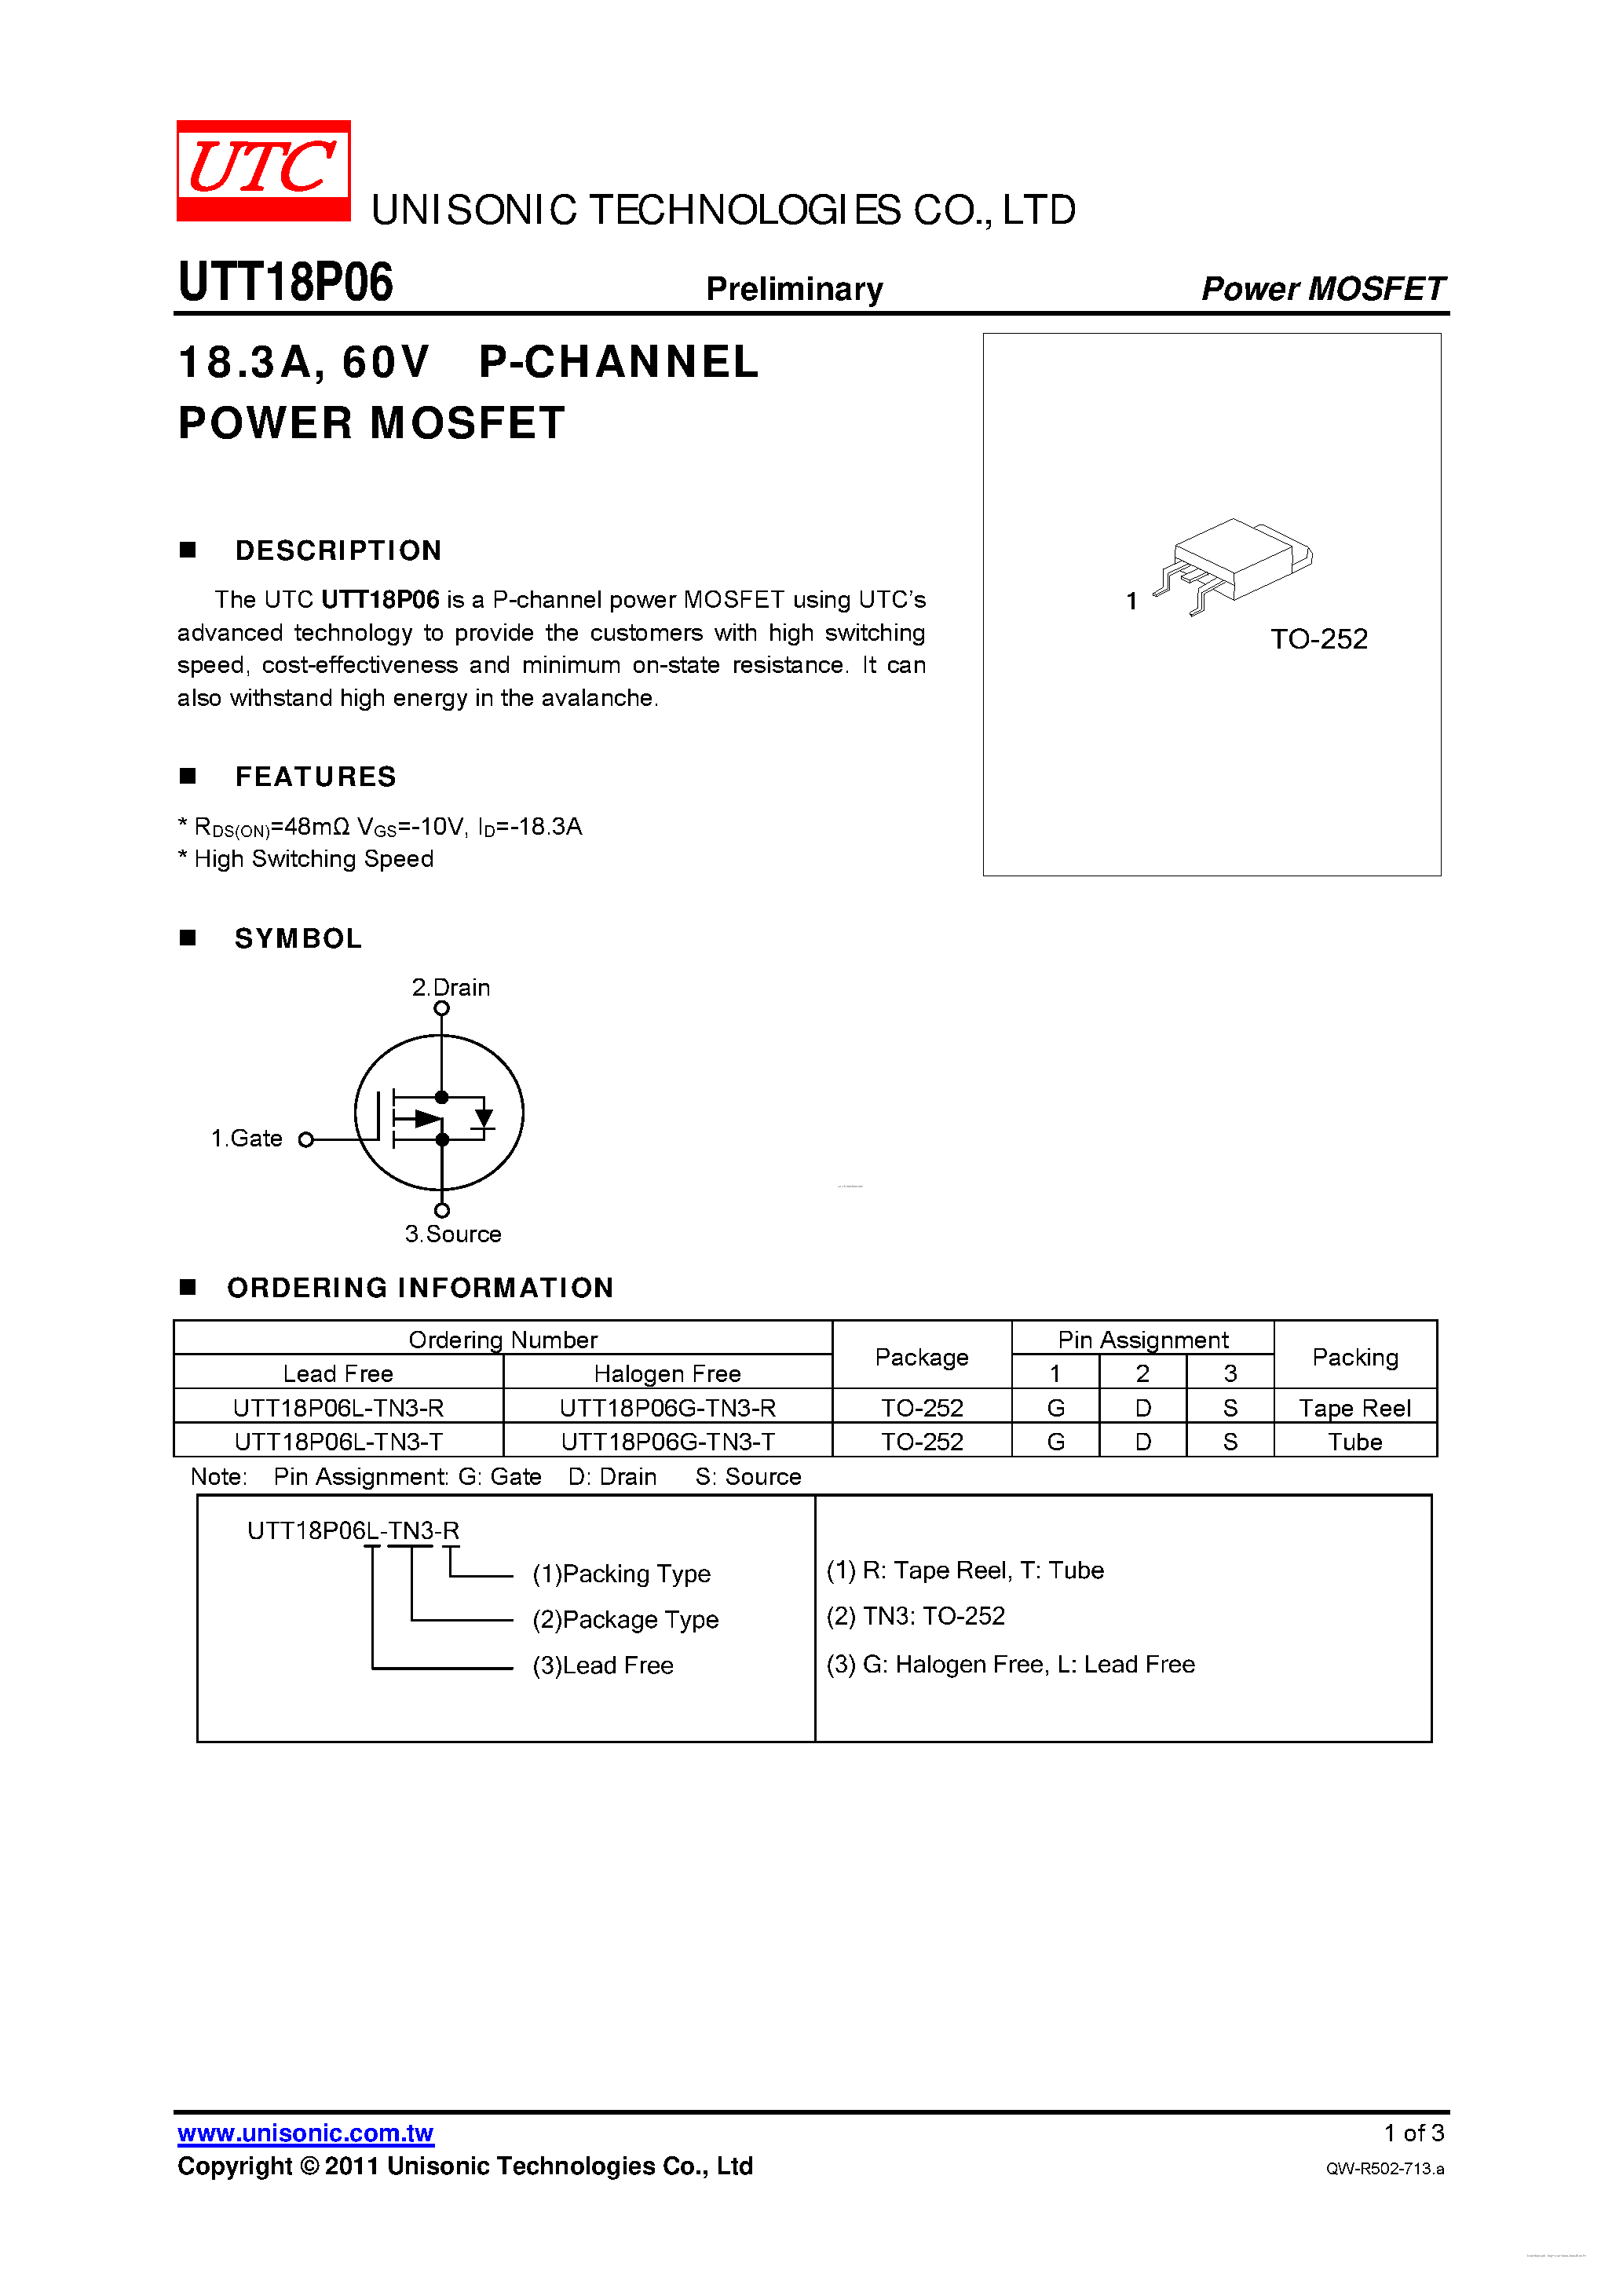 Datasheet UTT18P06 - P-CHANNEL POWER MOSFET page 1